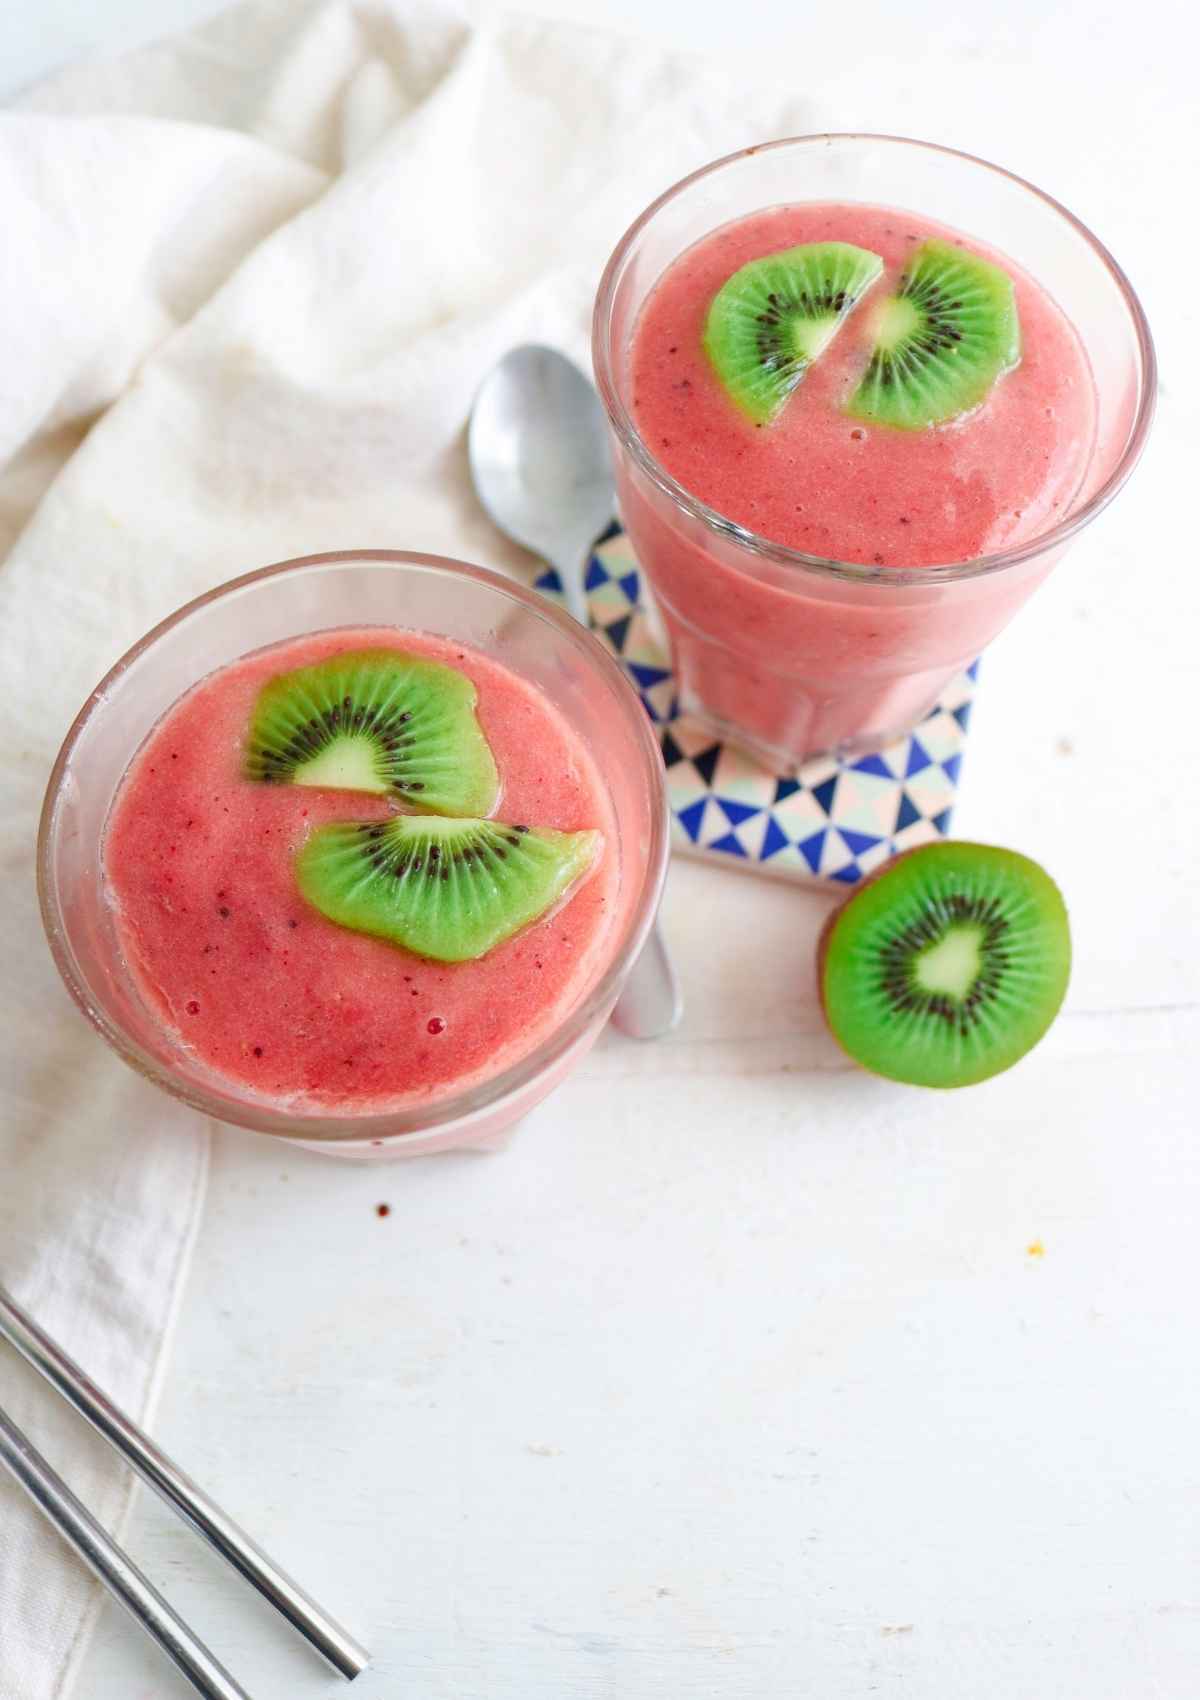 Strawberry Kiwi Pineapple Smoothie served in two glassed topped with kiwi slices